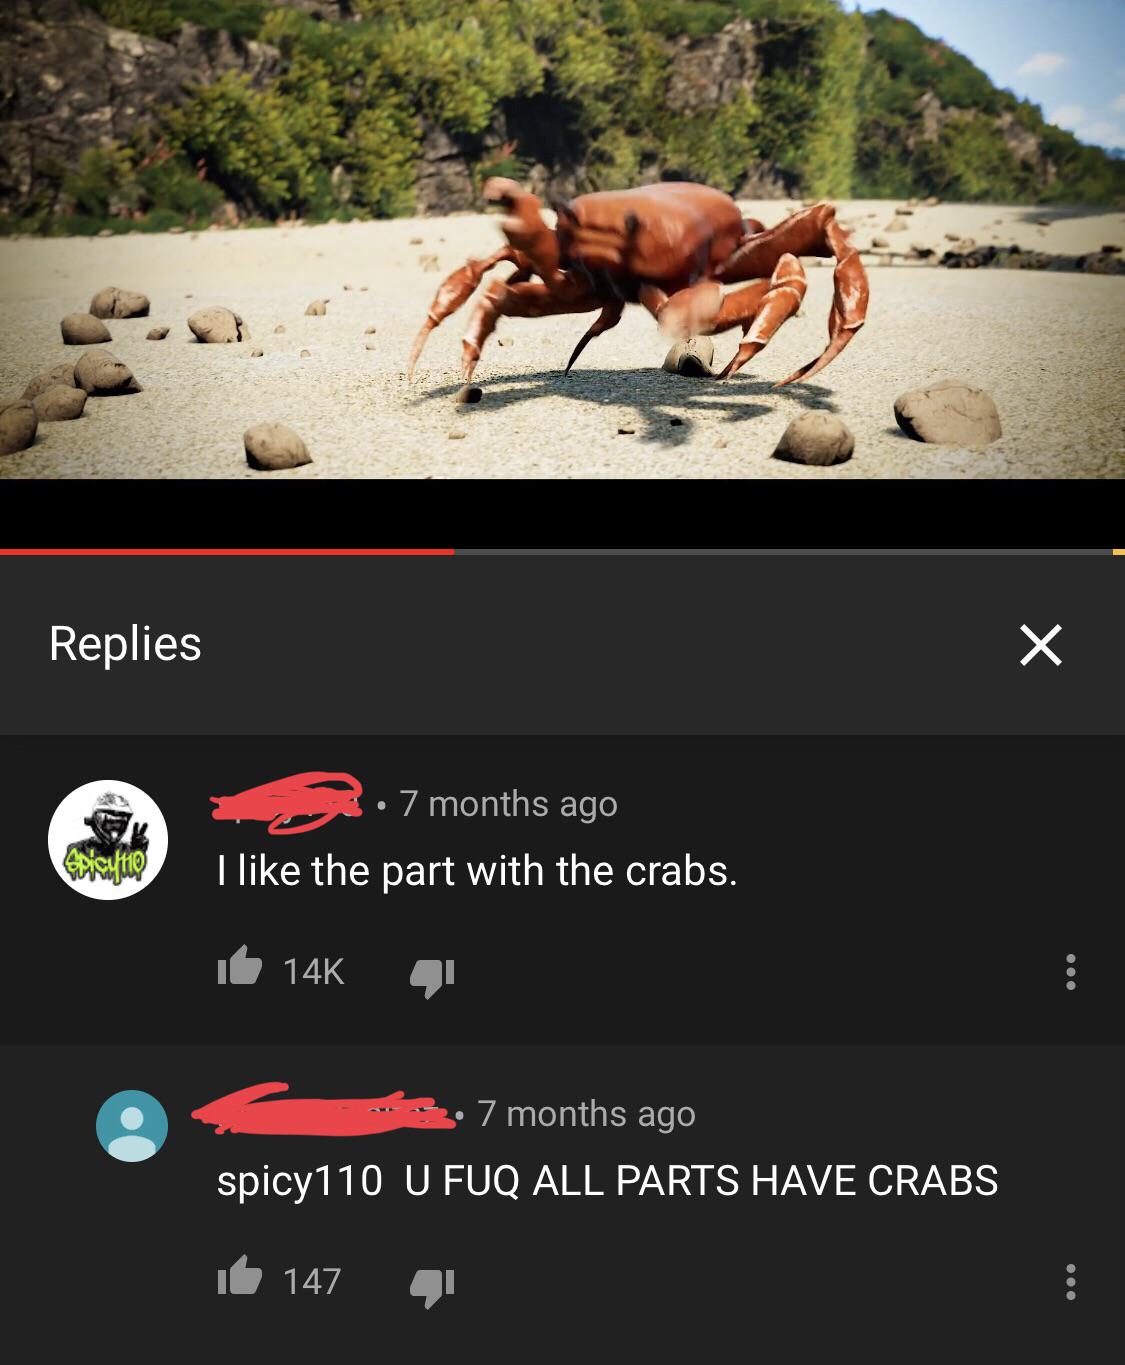 missed - photo caption - Replies C 7 months ago I the part with the crabs. Sticy tip Id 14K 4 3. 7 months ago spicy110 U Fuq All Parts Have Crabs it 147 41